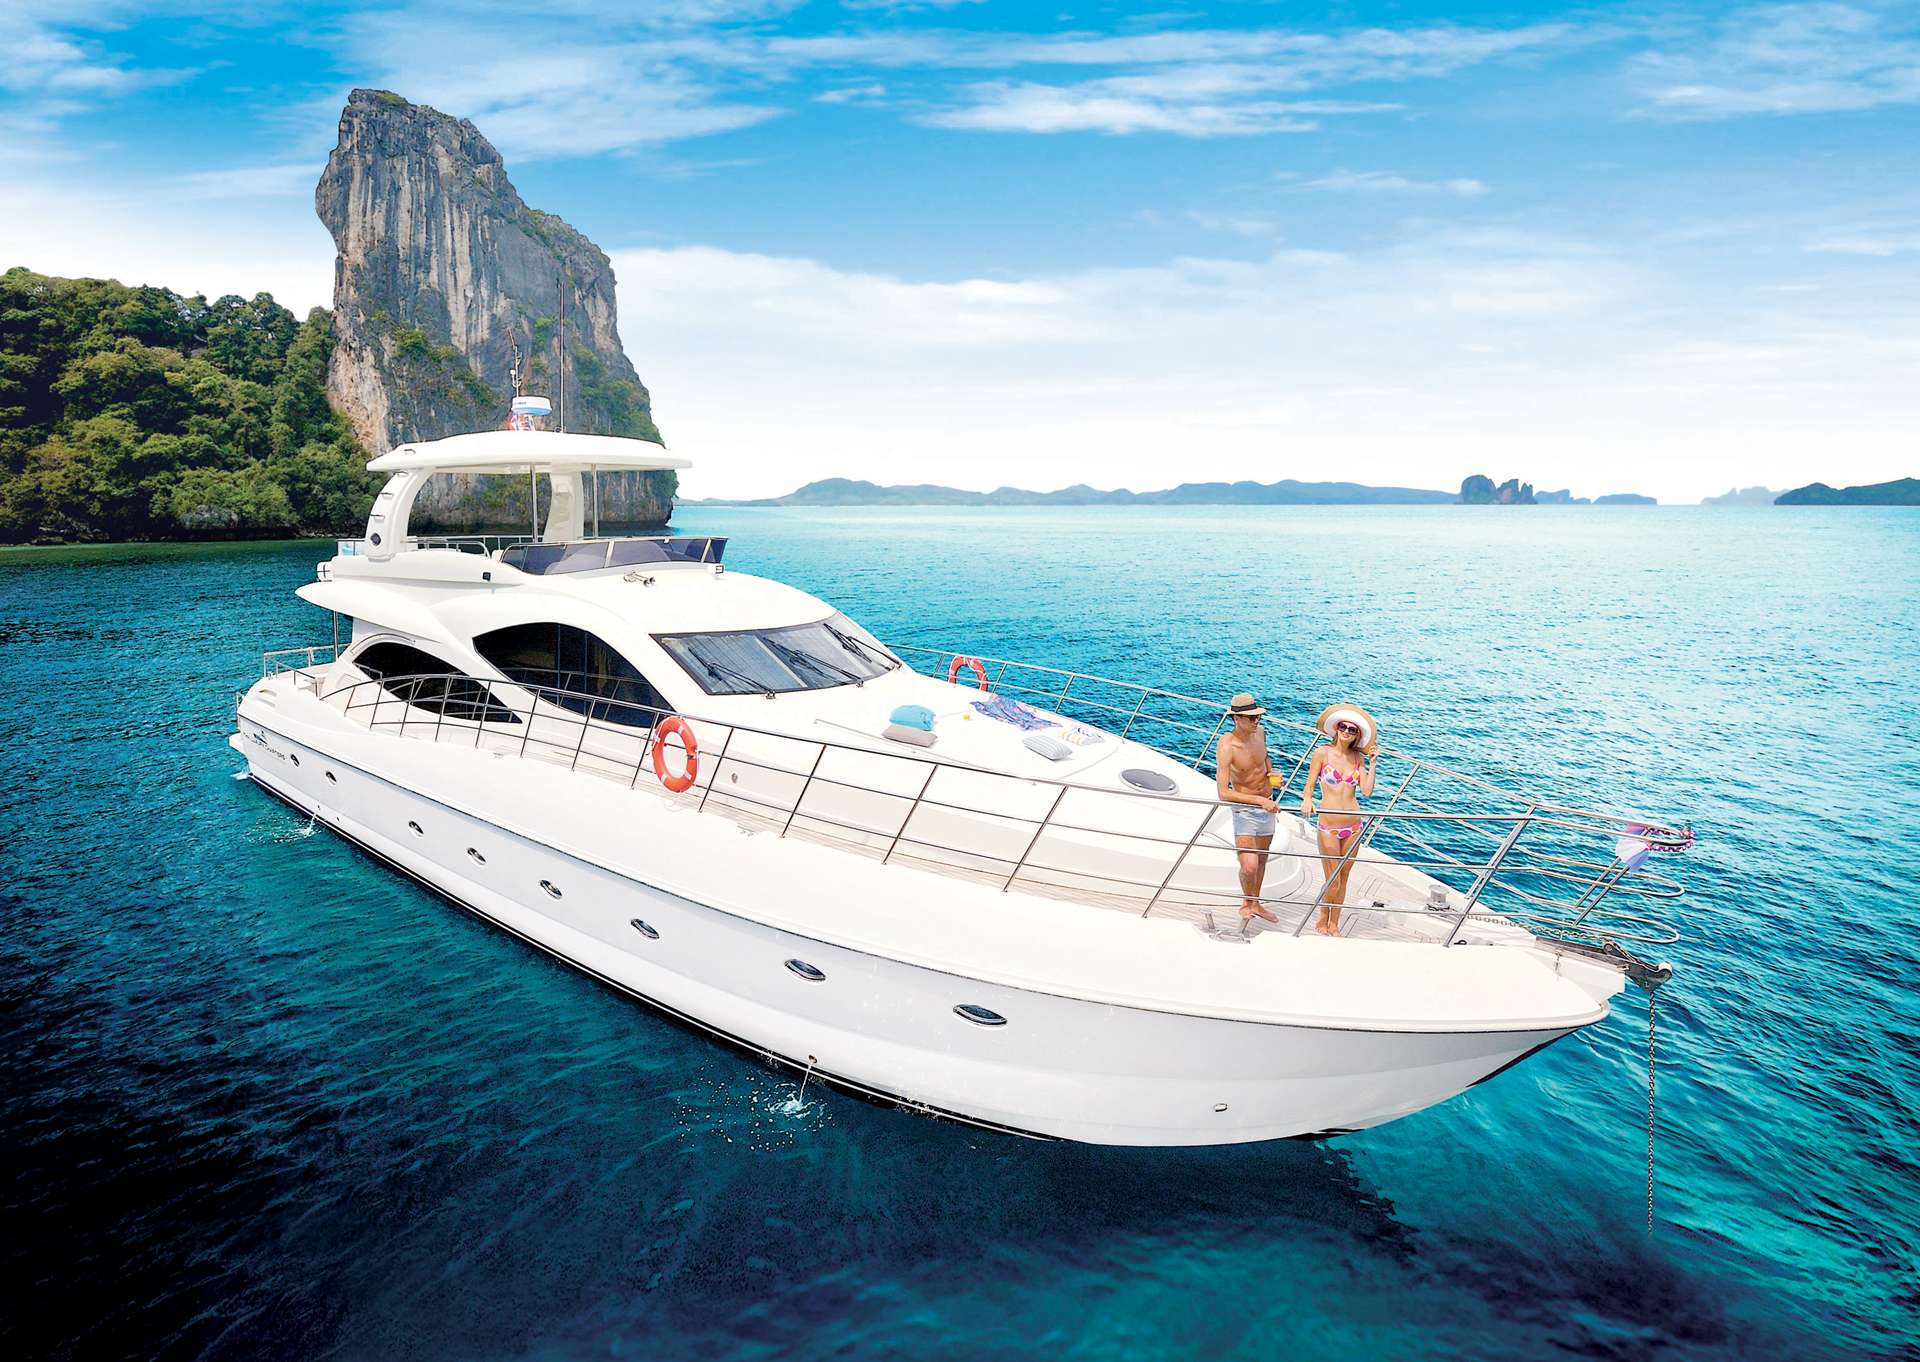 lady kathryn - Yacht Charter Koh Samui & Boat hire in SE Asia 1